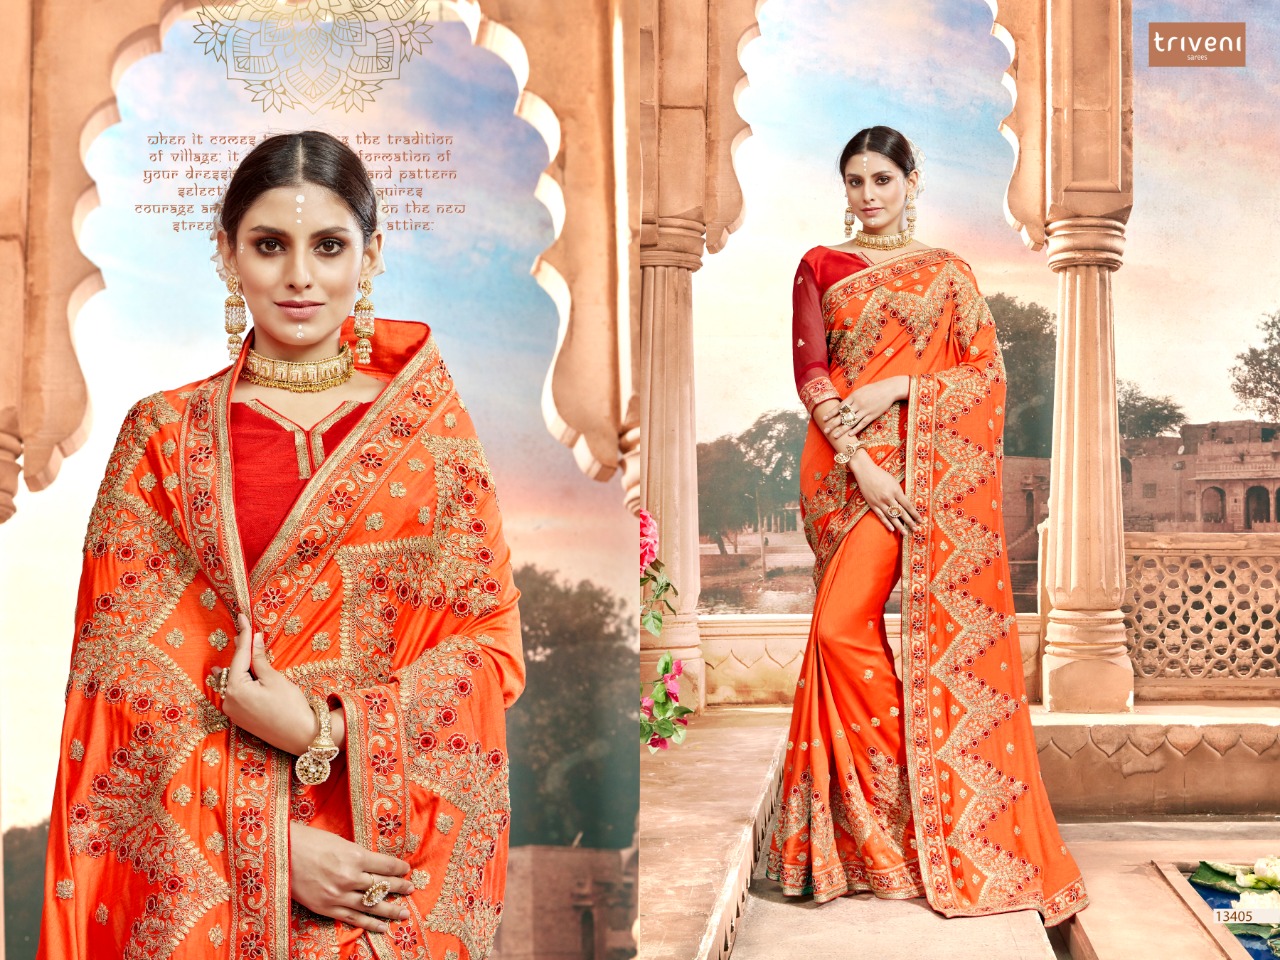 triveni new jubilee colorful beautiful collection of sarees